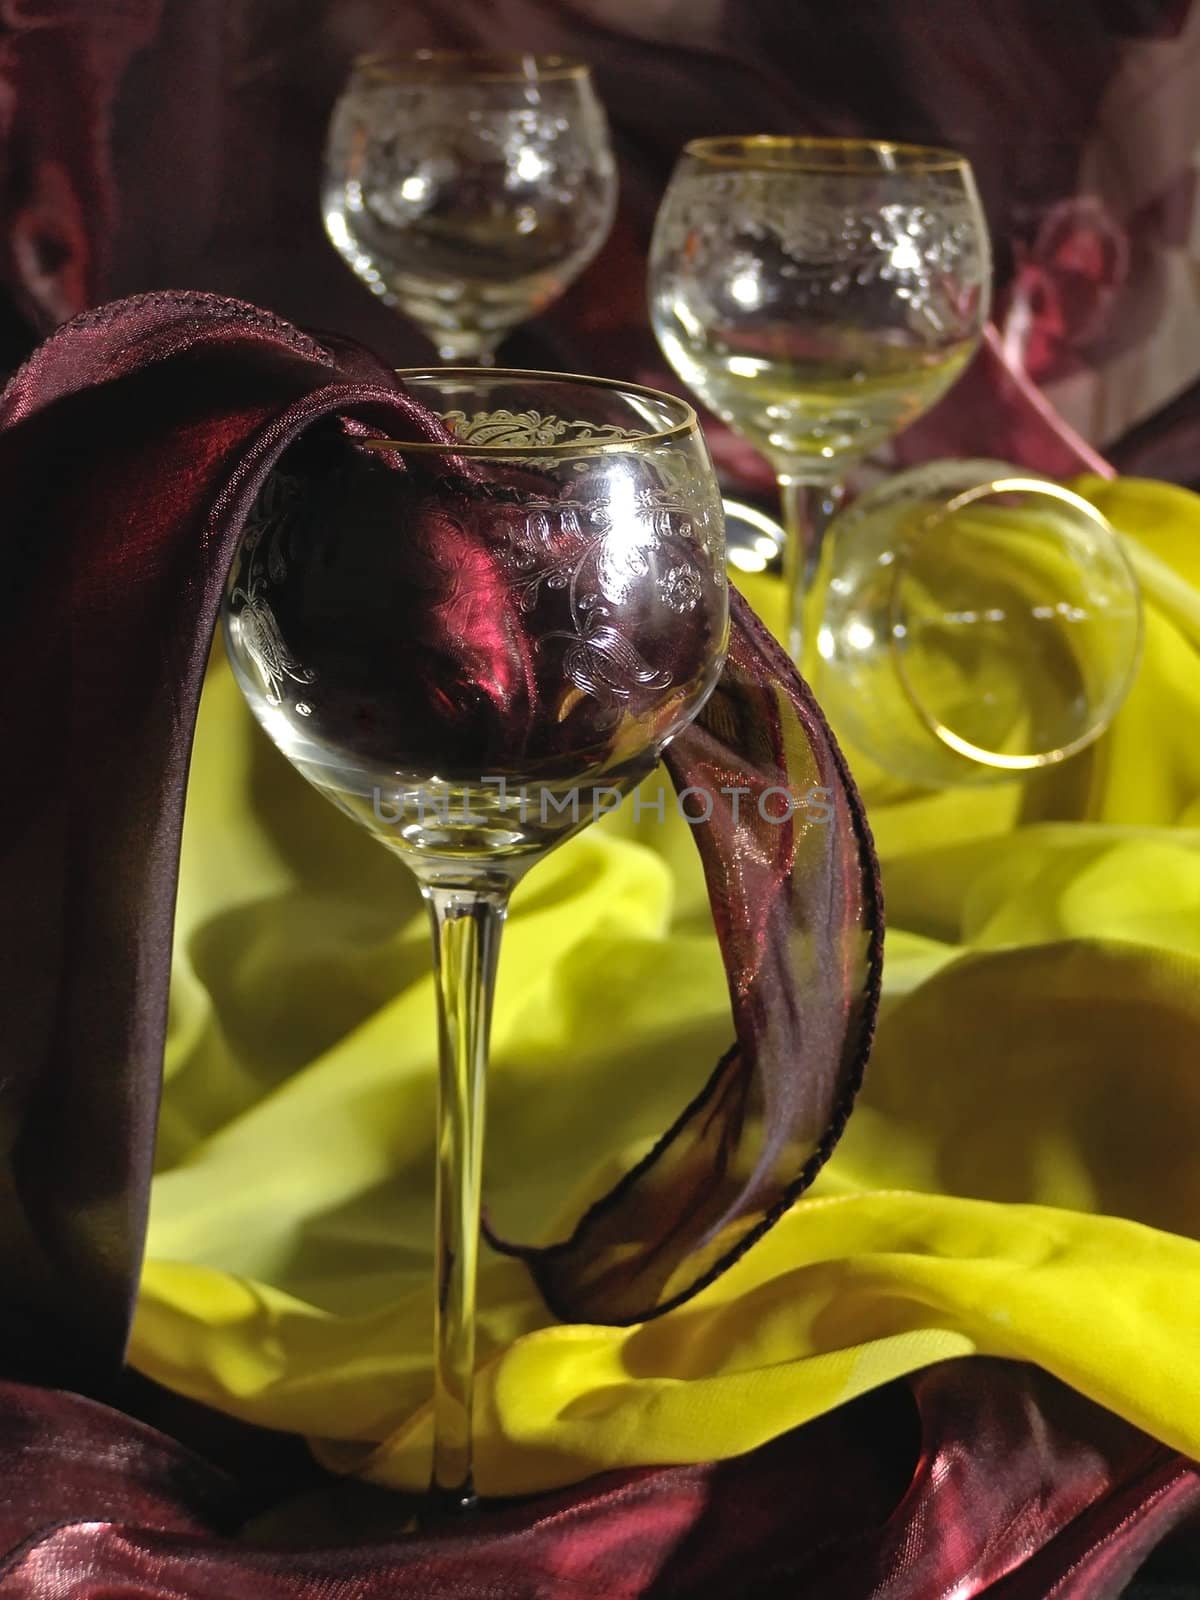 wineglasses against the red and yellow tissue